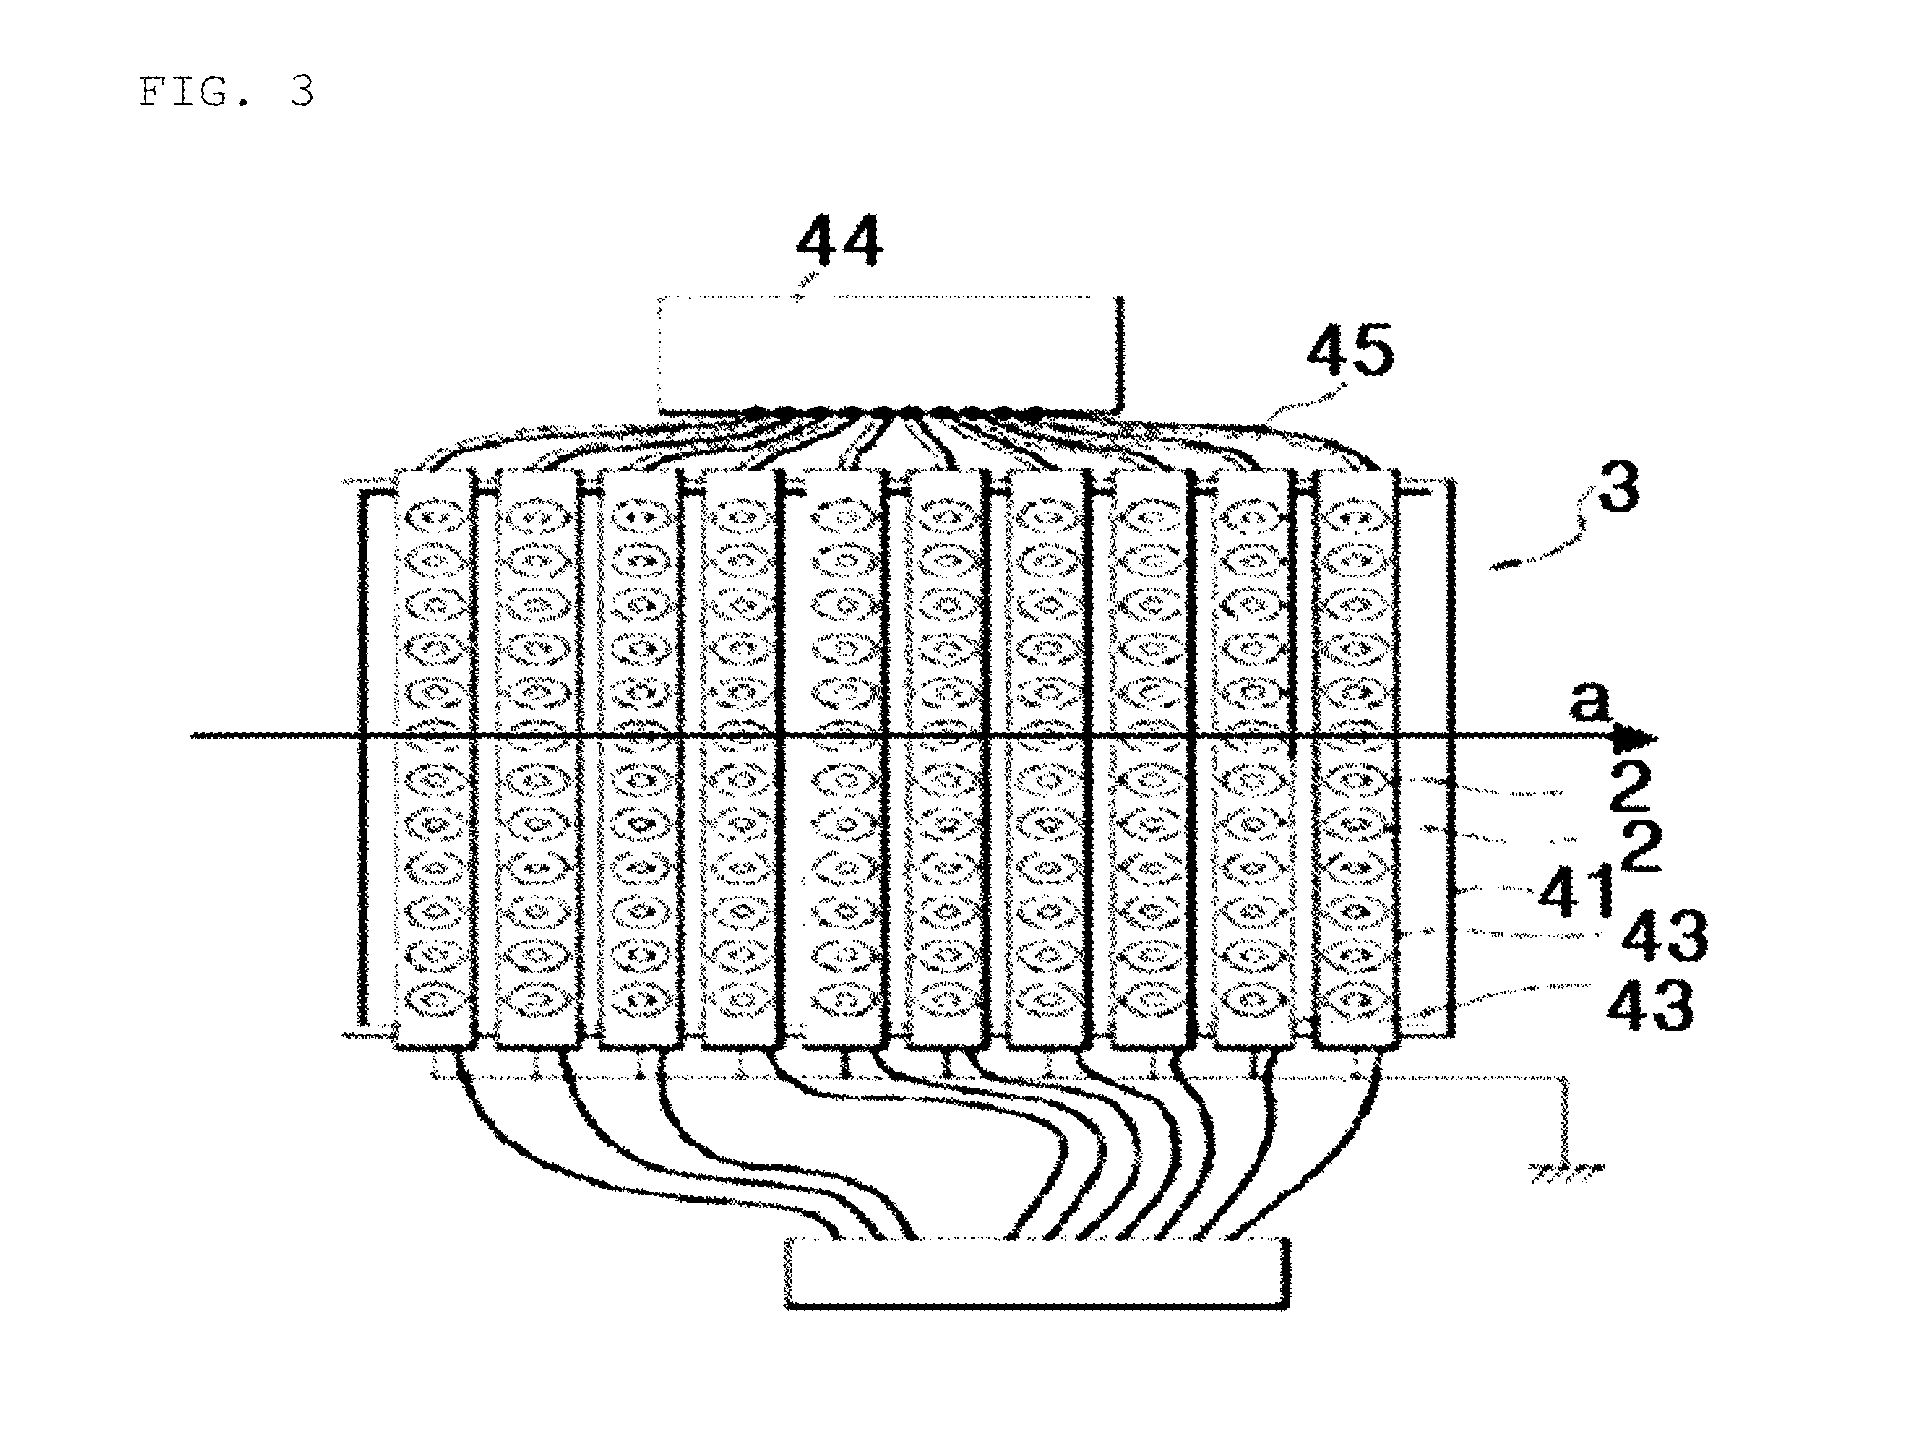 Multi-layered nanofiber medium using electro-blowing, melt-blowing or electrospinning, and method for manufacturing same